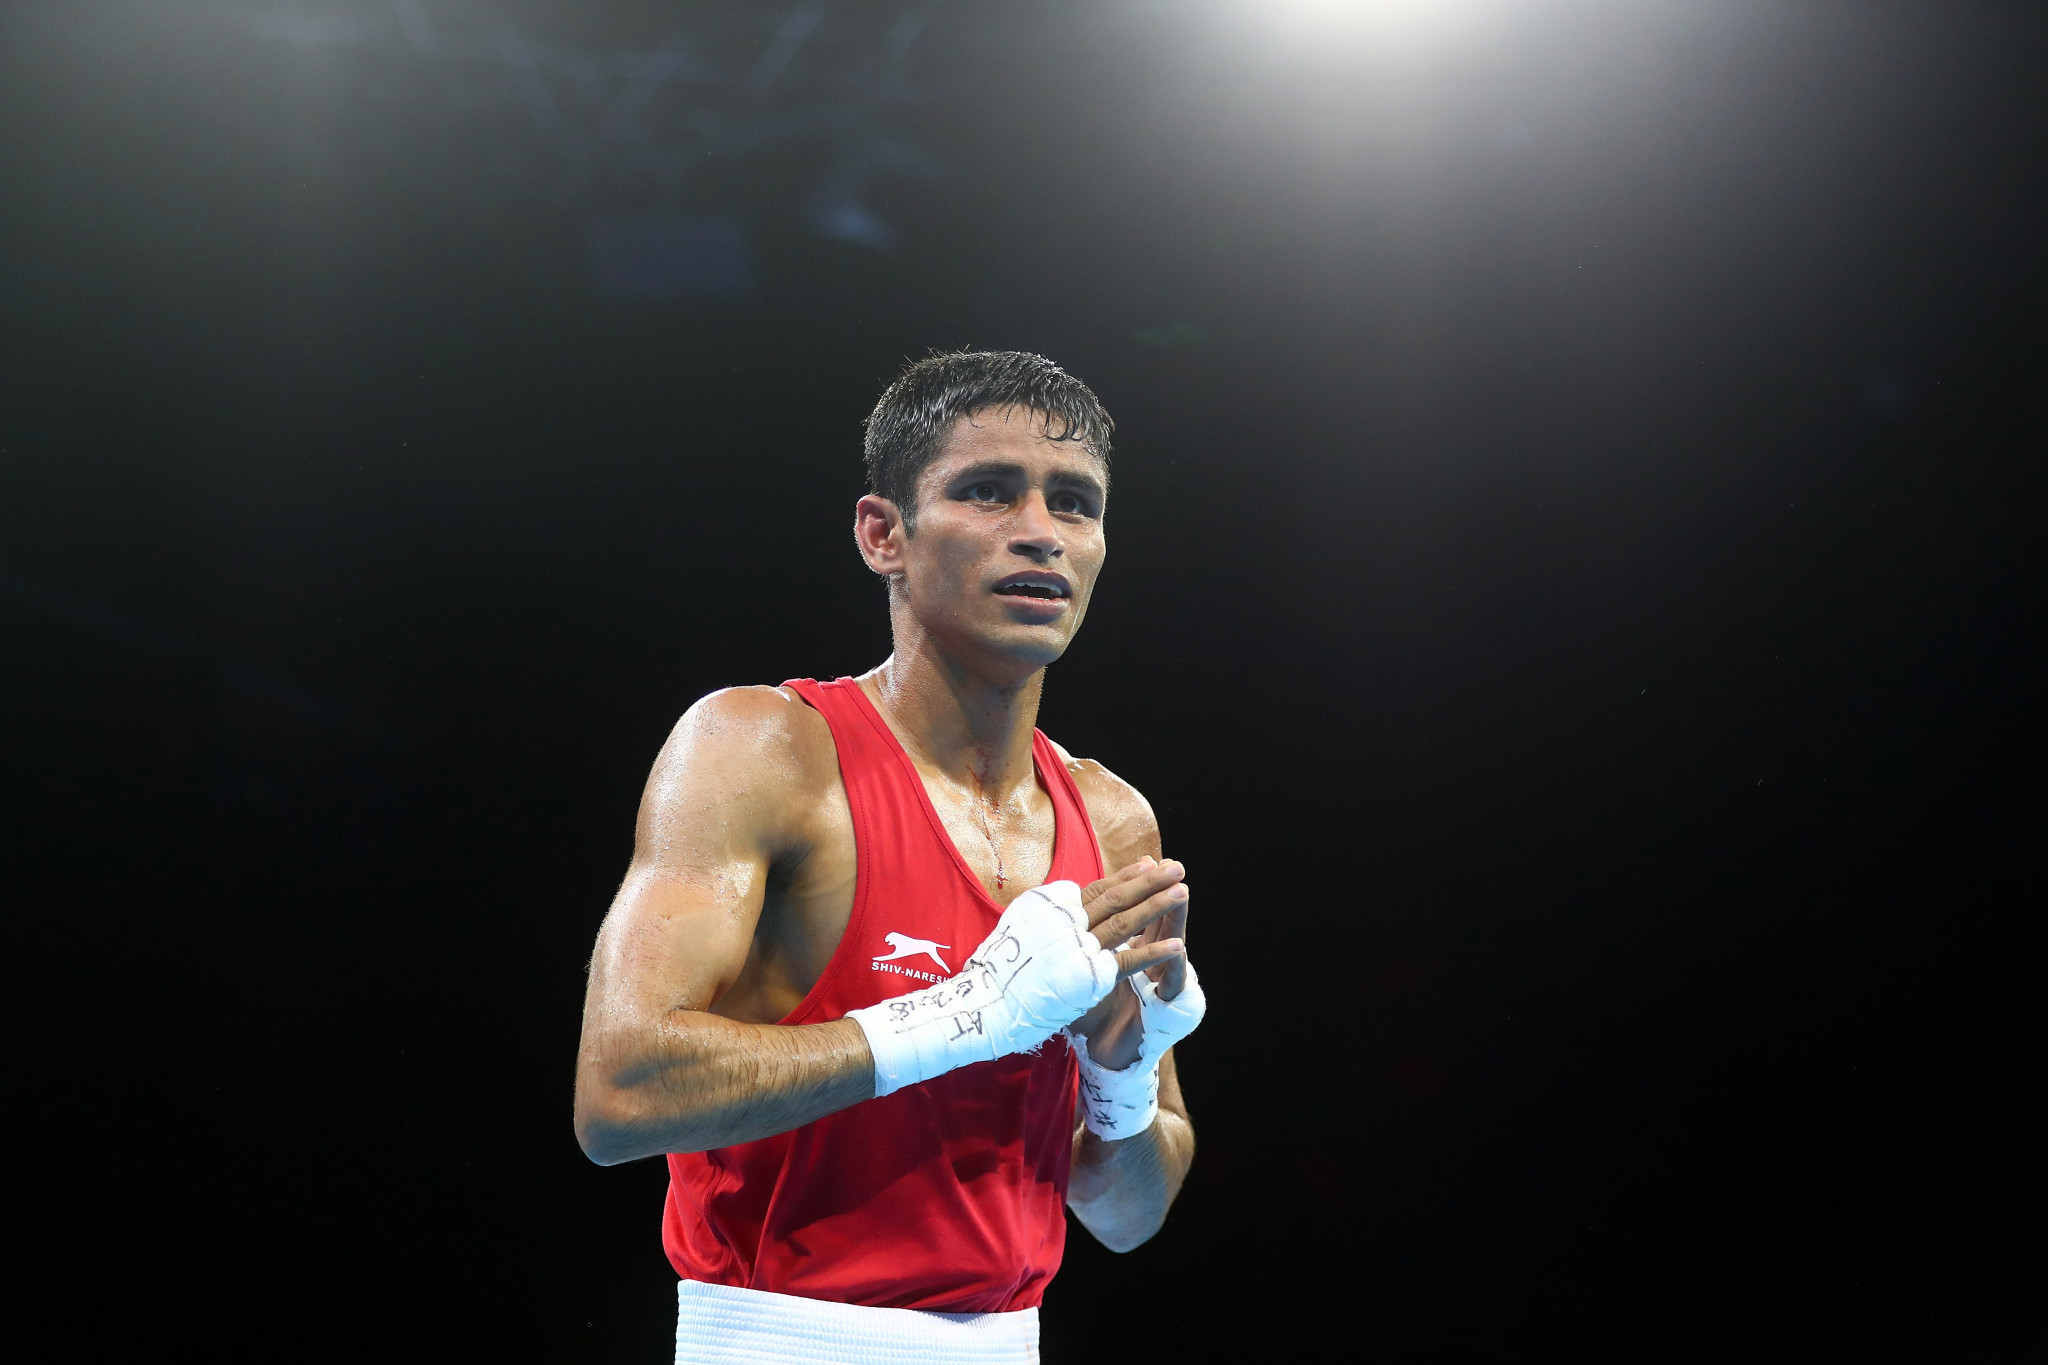 The new selection policy is designed to give elite boxers more opportunities during their video-recorded trials ©Getty Images